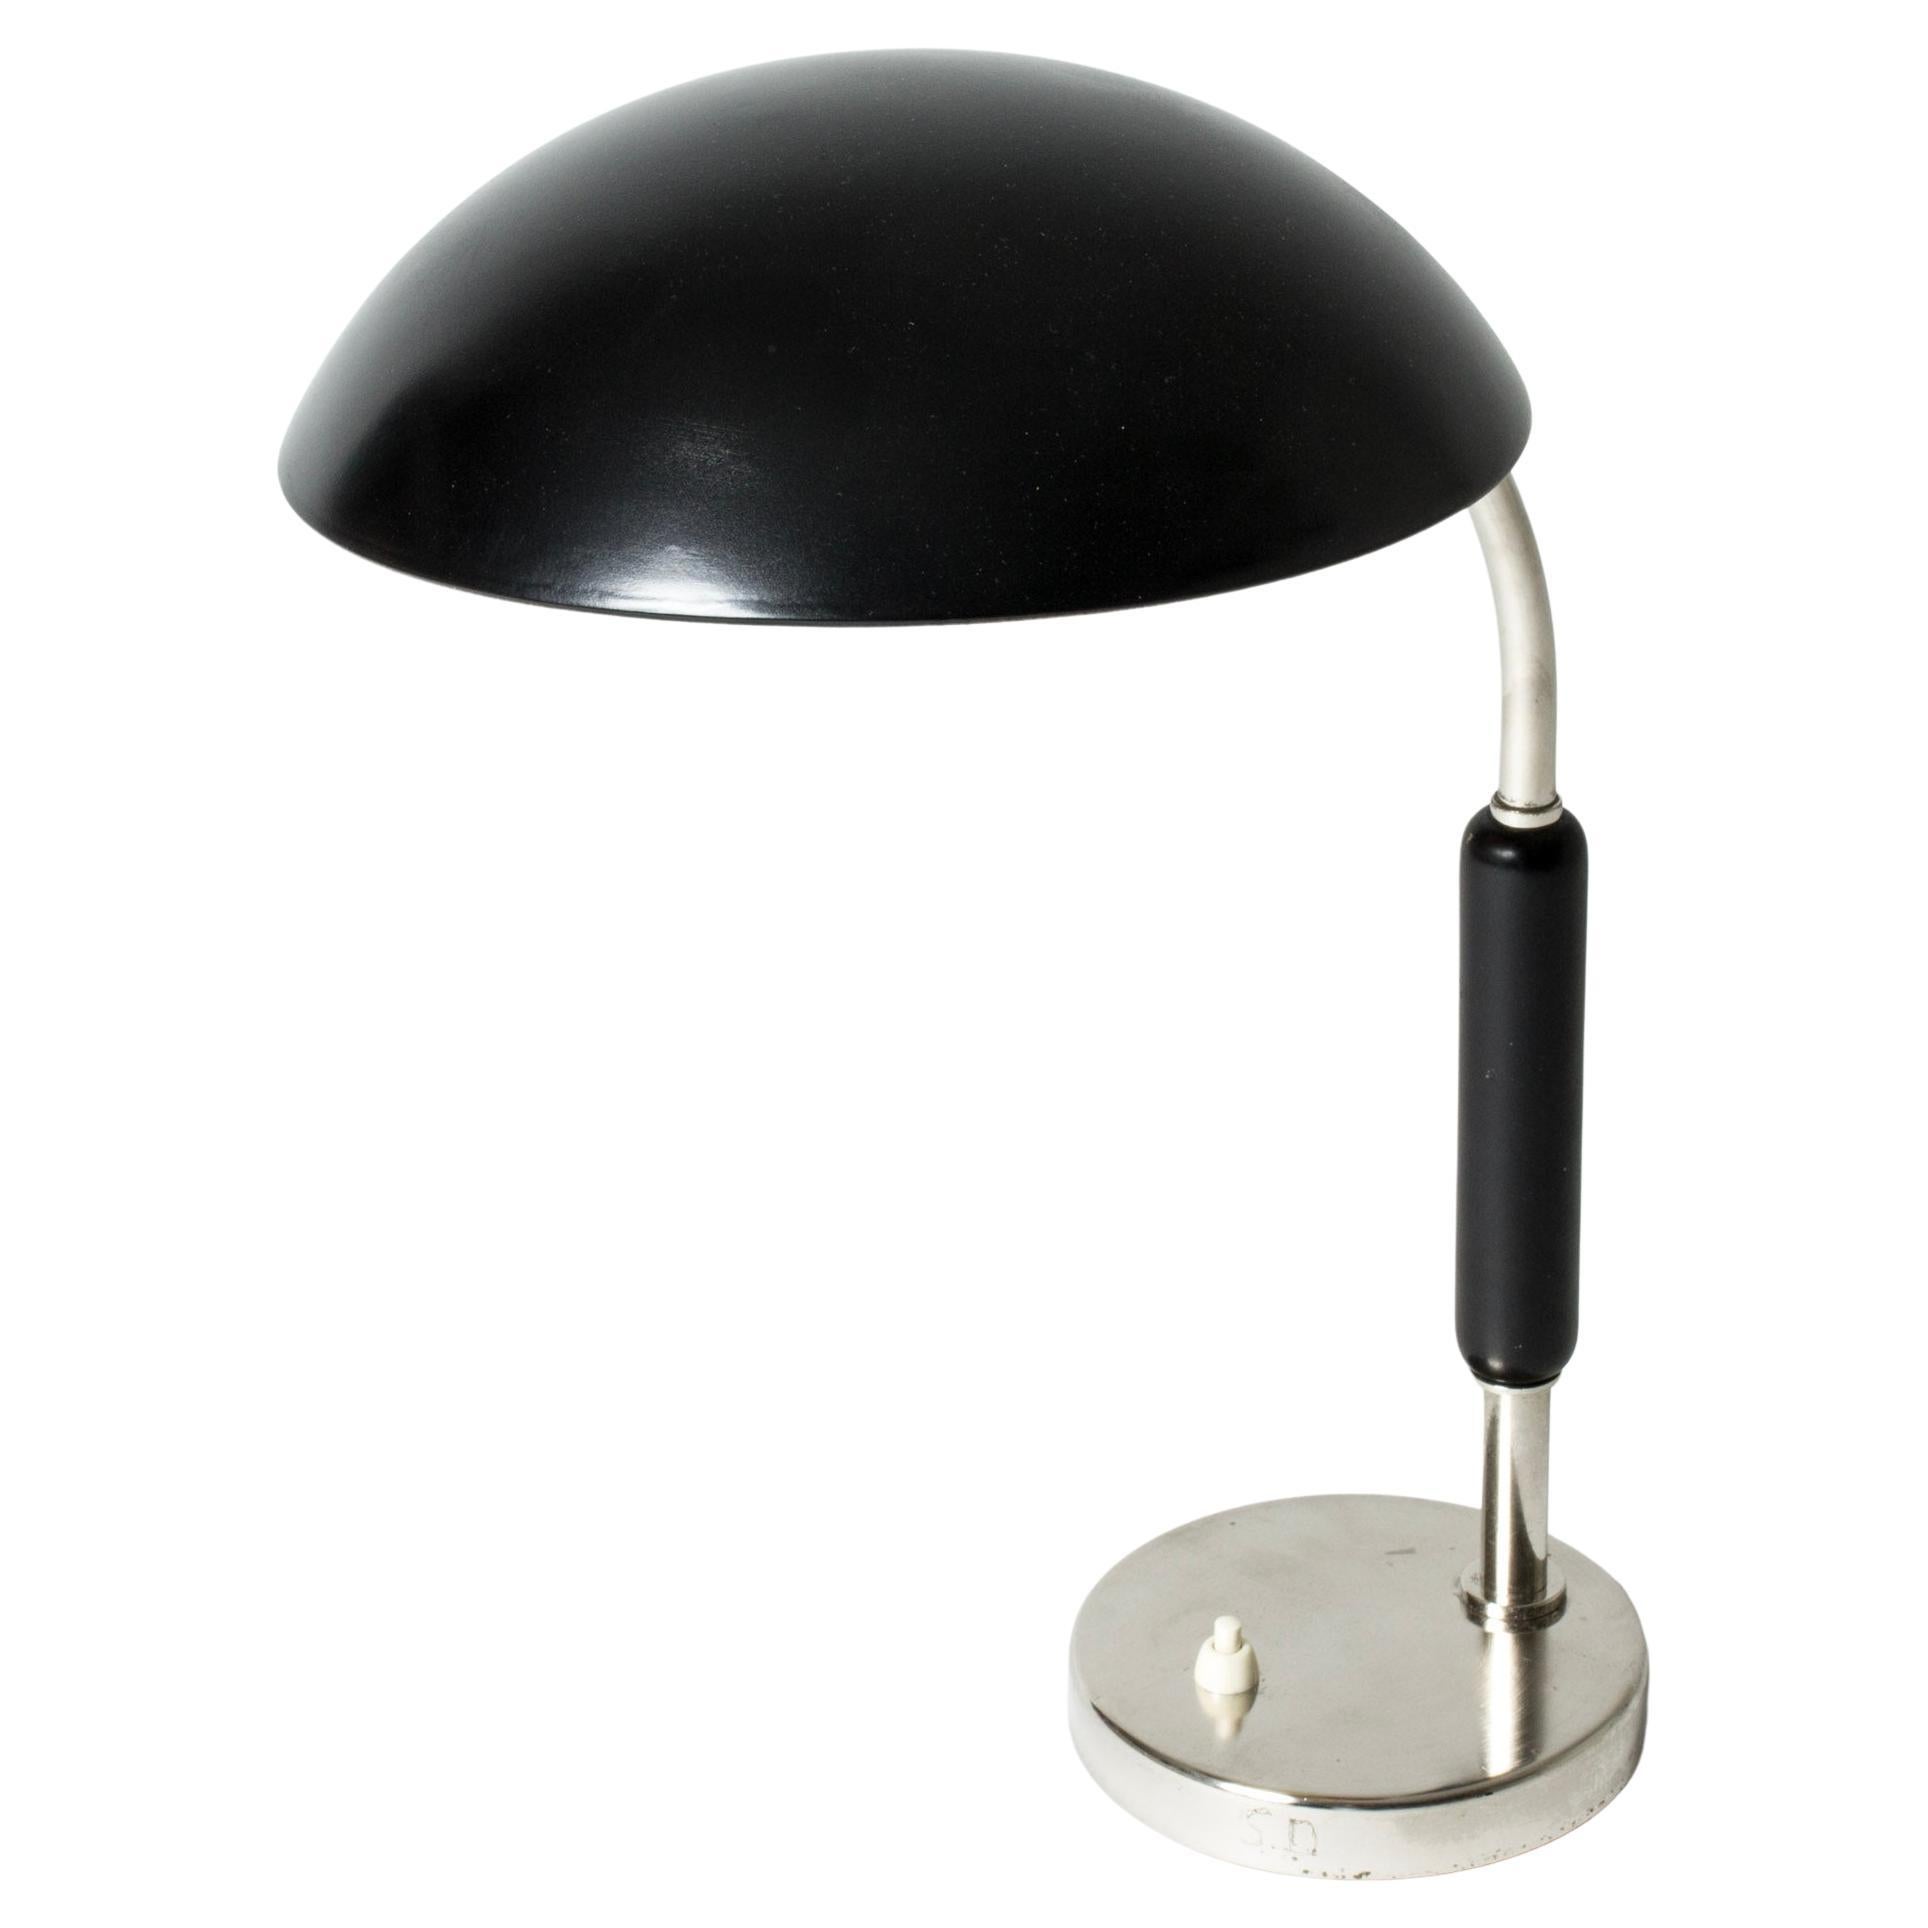 Vintage Functionalist Table or Desk Lamp from ASEA, Sweden, 1930s